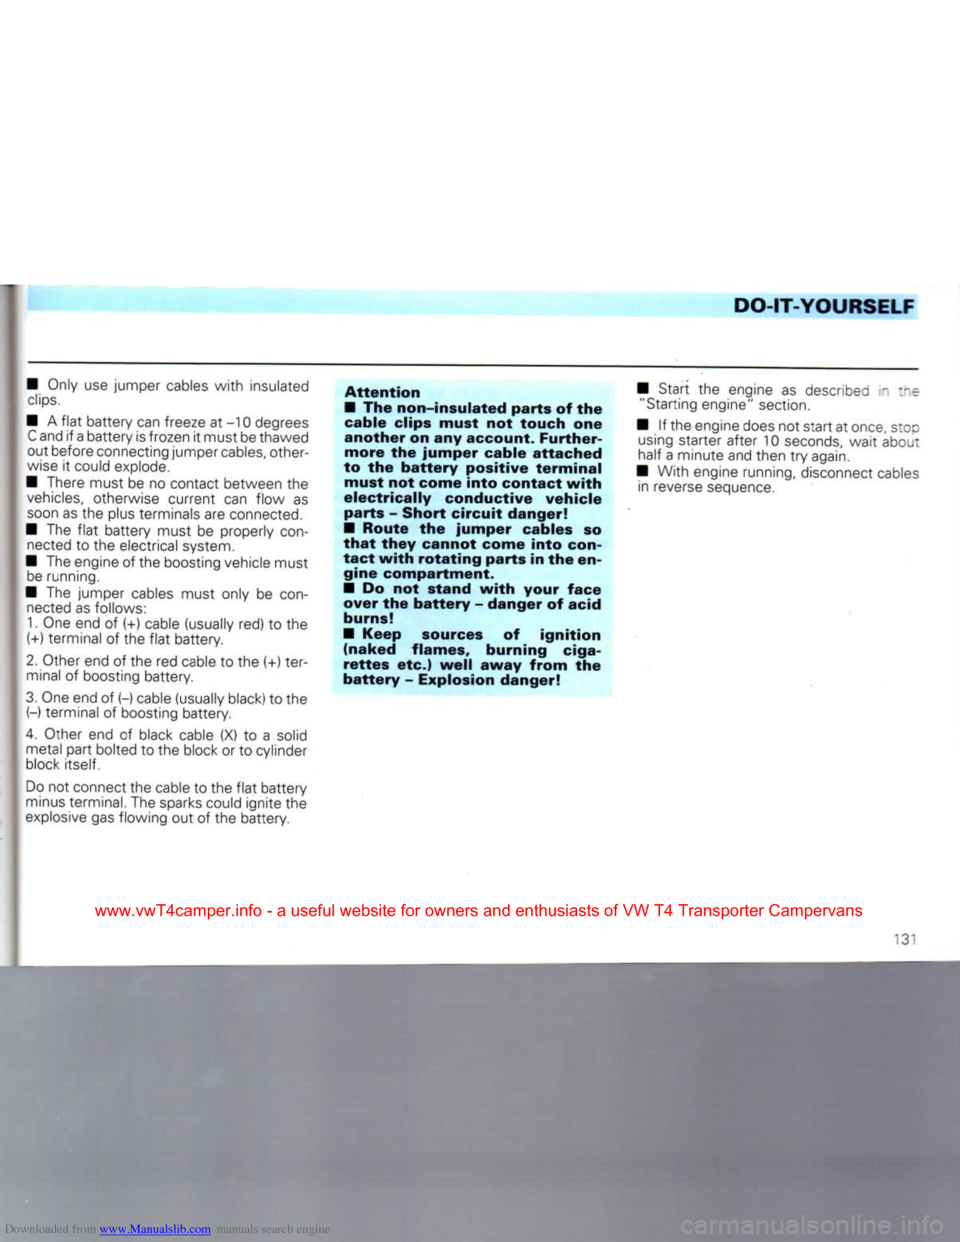 VOLKSWAGEN TRANSPORTER 1992 T4 / 4.G Owners Manual Downloaded from www.Manualslib.com manuals search engine 
DO-IT-YOURSELF 
• Only
 use
 jumper cables
 with
 insulated 
 clips. 

•
 A
 flat
 battery can freeze
 at
 -10 degrees 
 C
 and
 if
 a bat